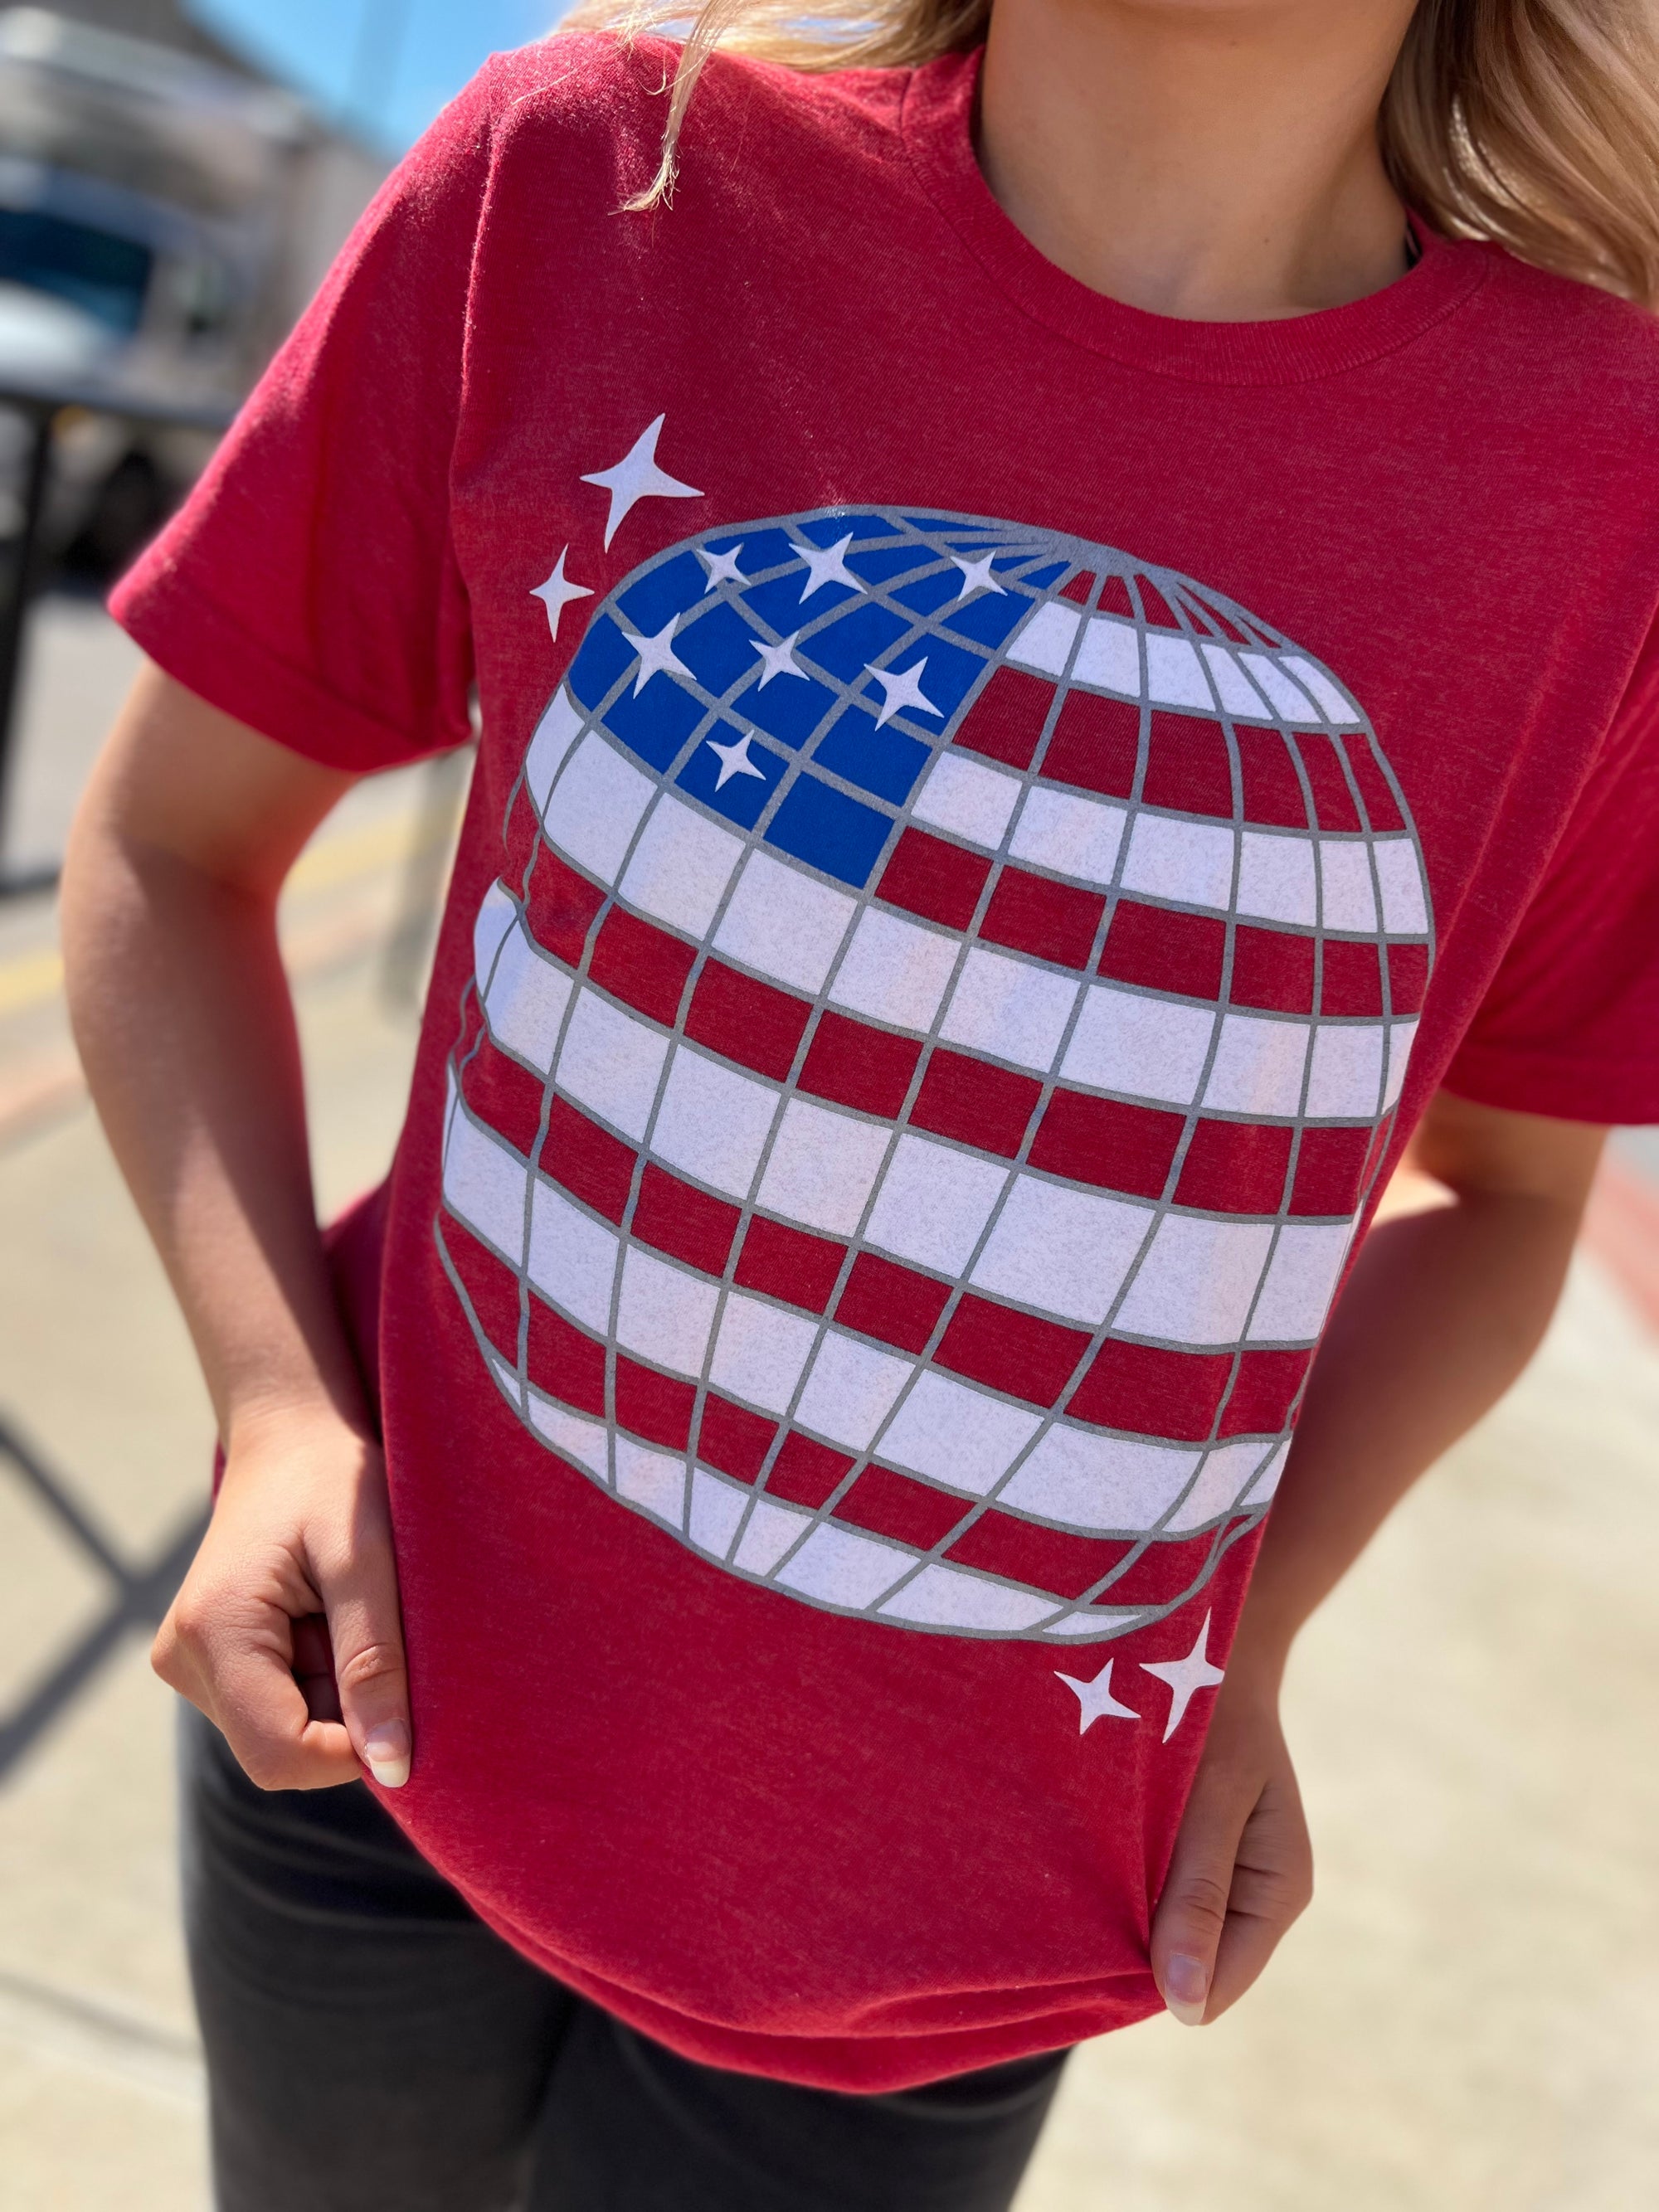 Graphic Tee - Disco Red, White, & Blue Flag